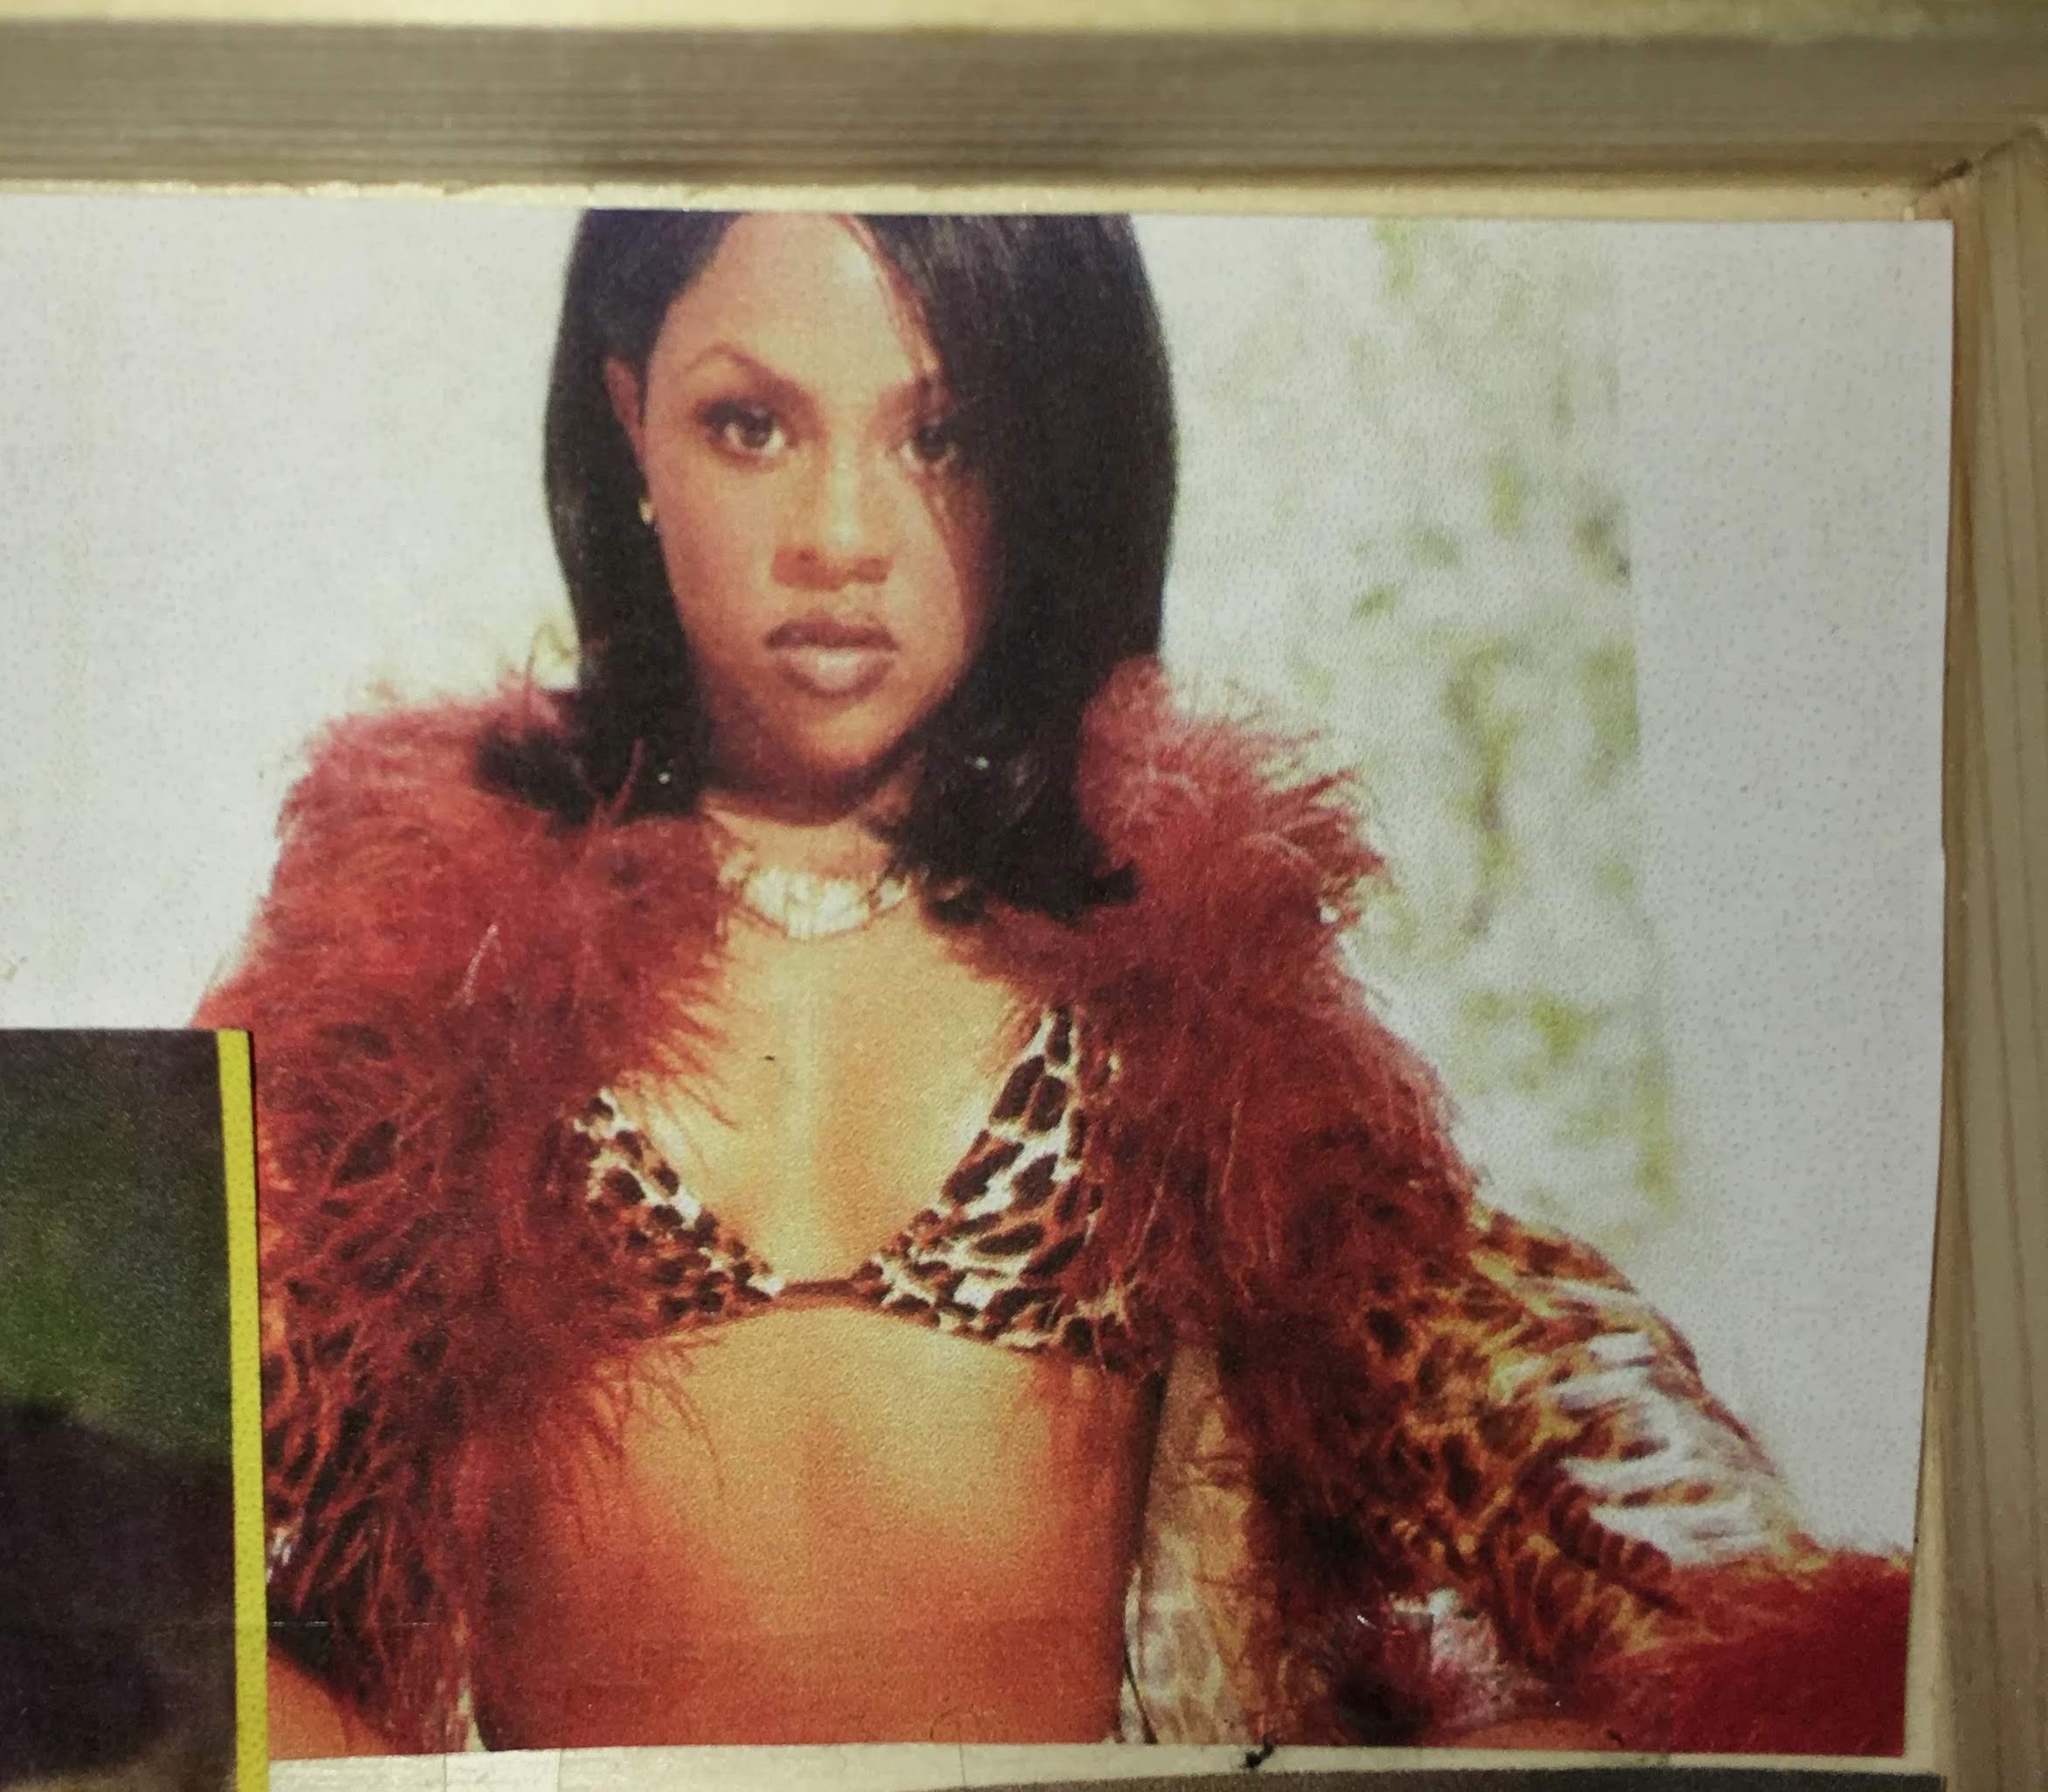 This is an image of Lil Kim from her debut album ‘Hardcore’. I placed this image in the kit not only because she’s one of my favorite rappers, but because she’s an iconic figure in hip-hop culture and New York culture.